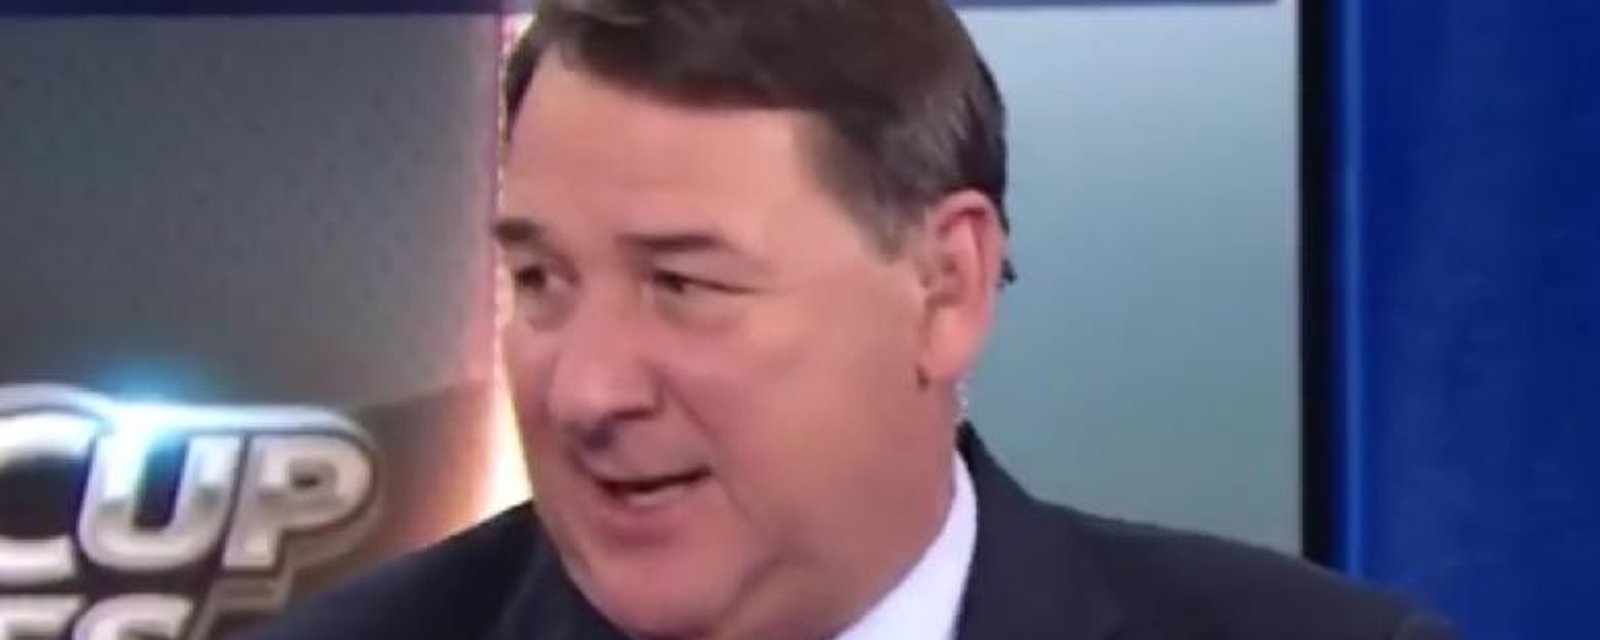 Mike Milbury appears to advocate for intentionally injuring players. 